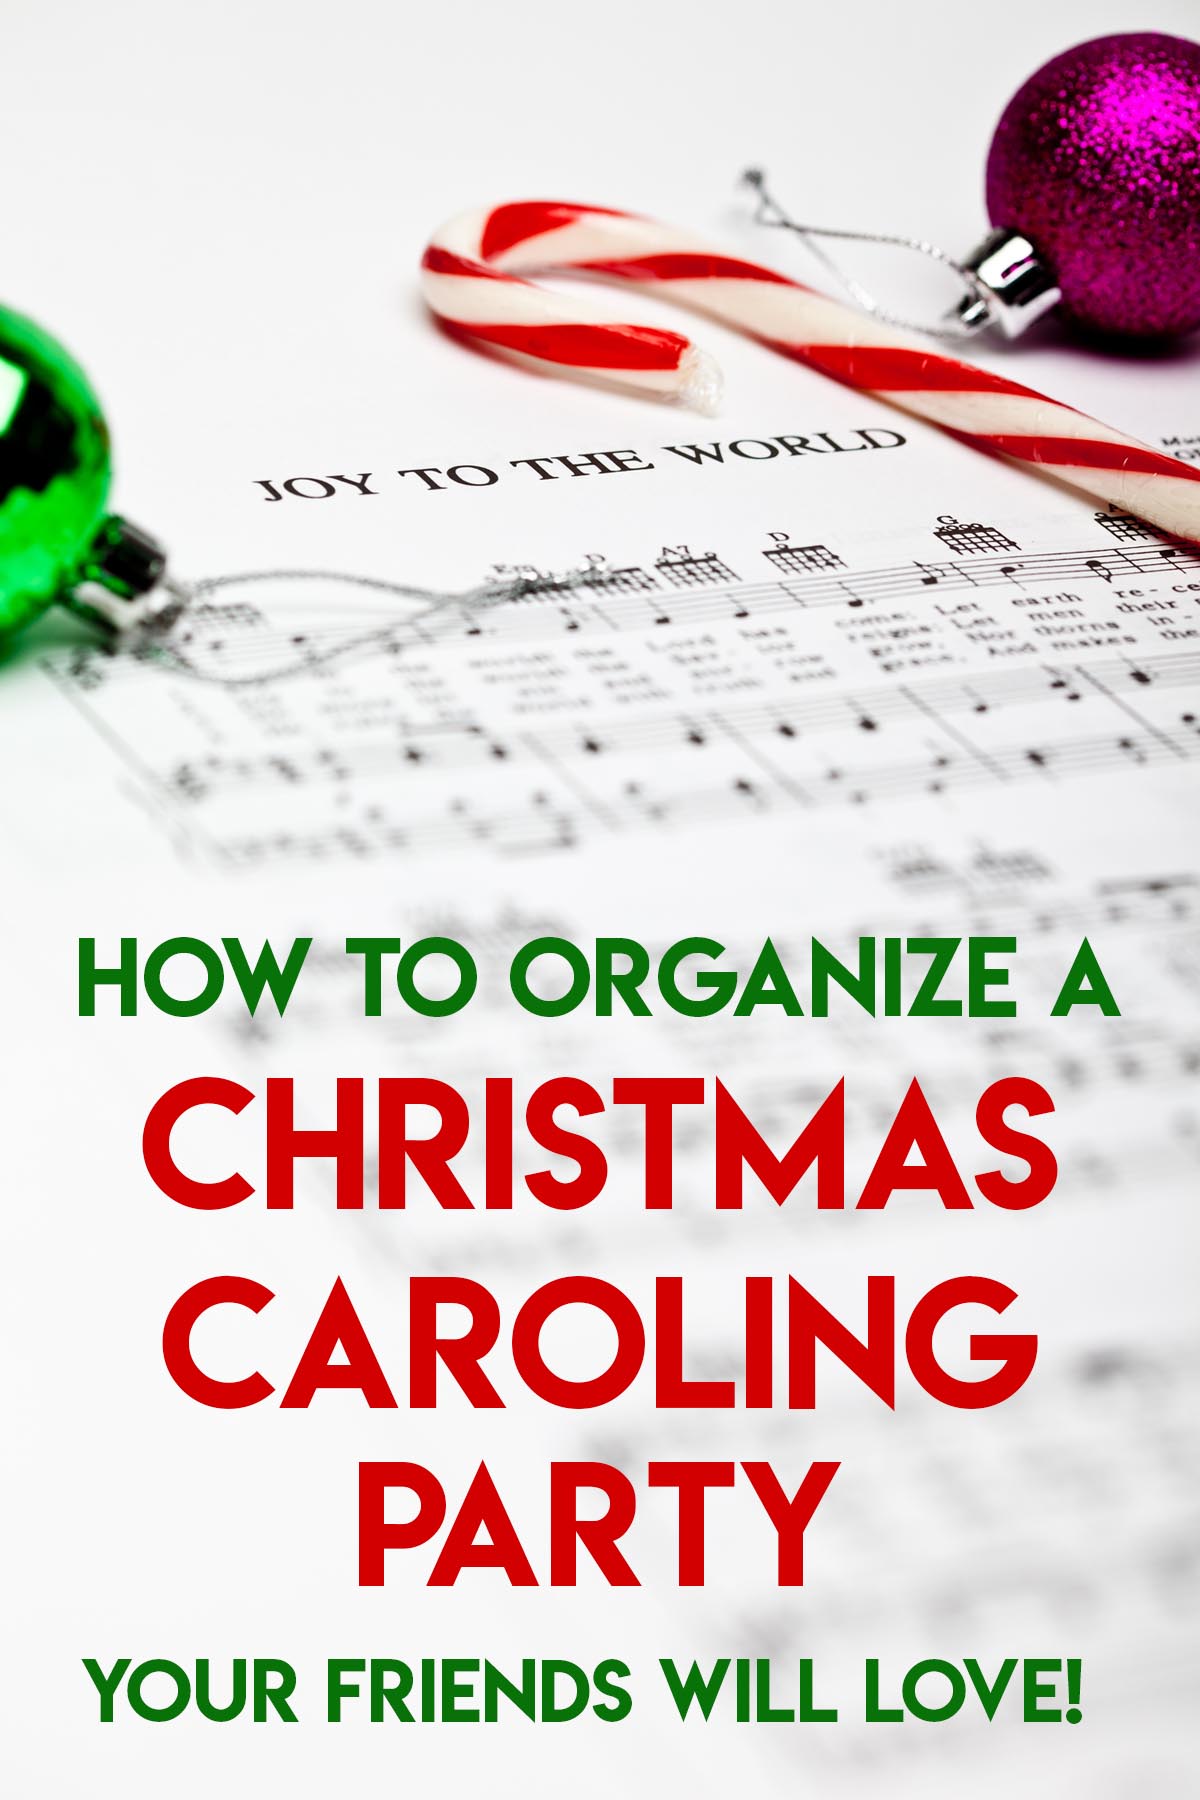 Step-by-step instructions to planning and executing a Christmas caroling party that everyone will love! via @lara_neves